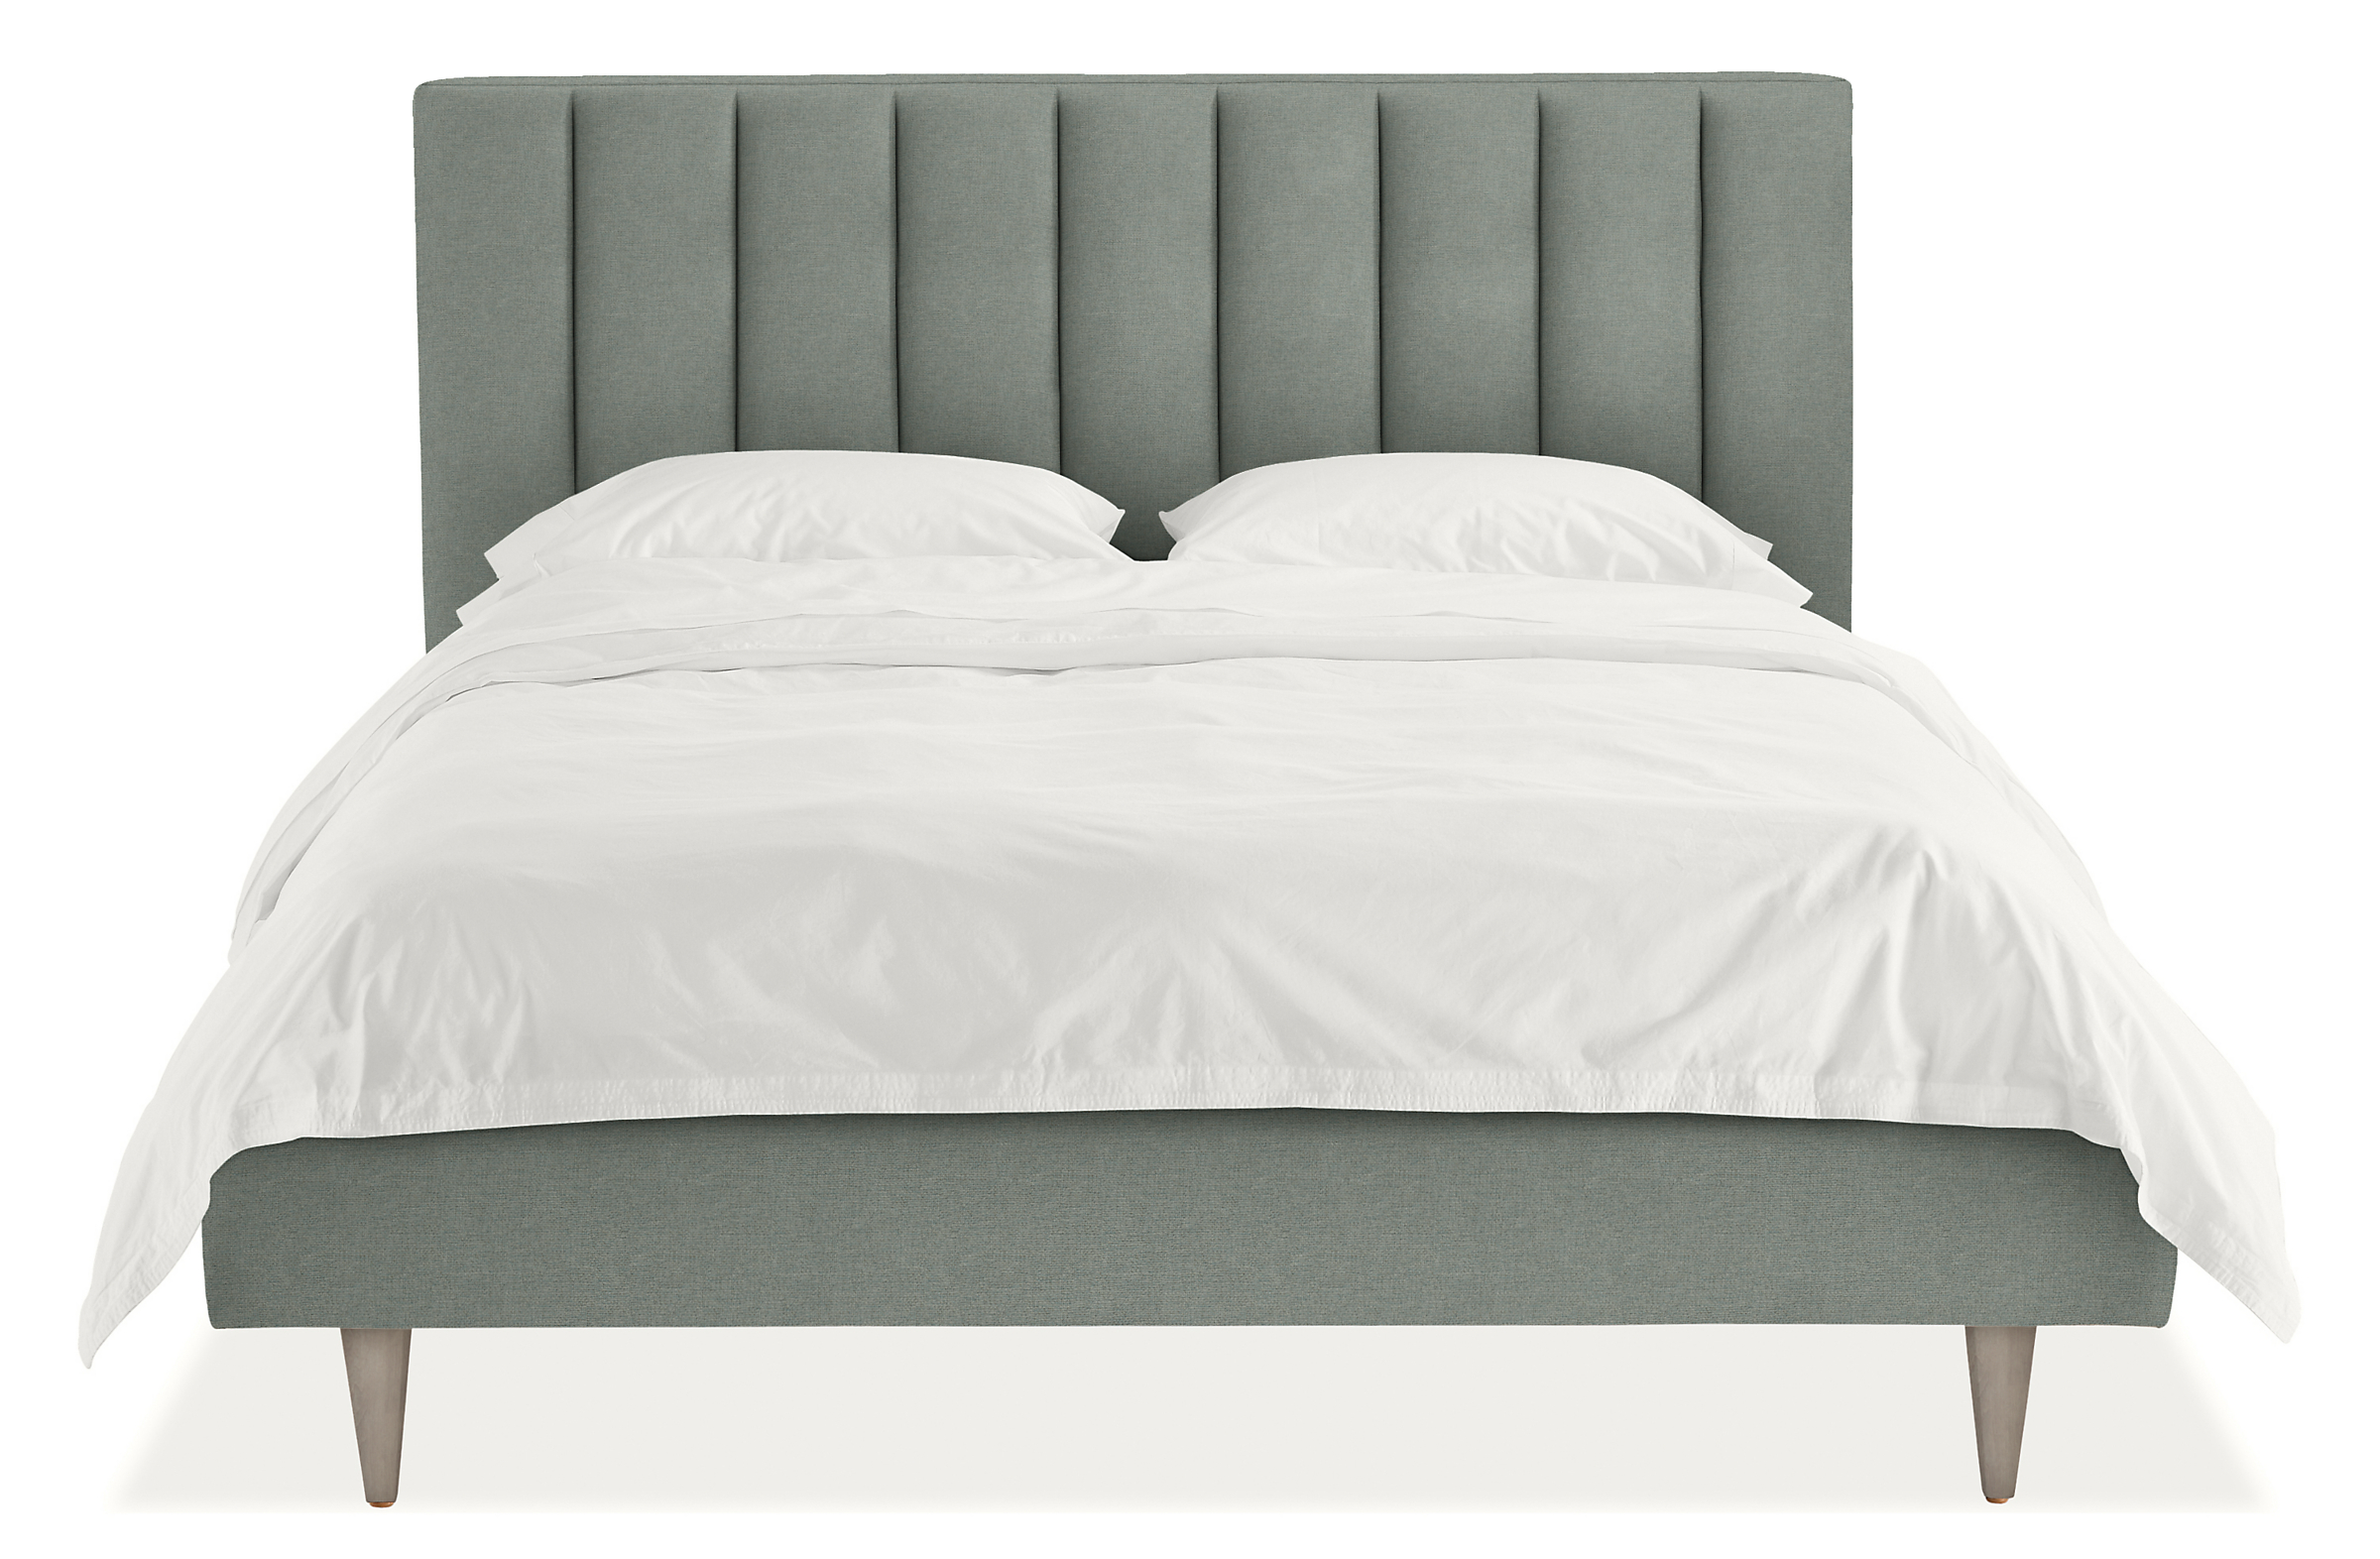 Hartley 48 High Queen Bed in Tatum Spa with Shell Legs